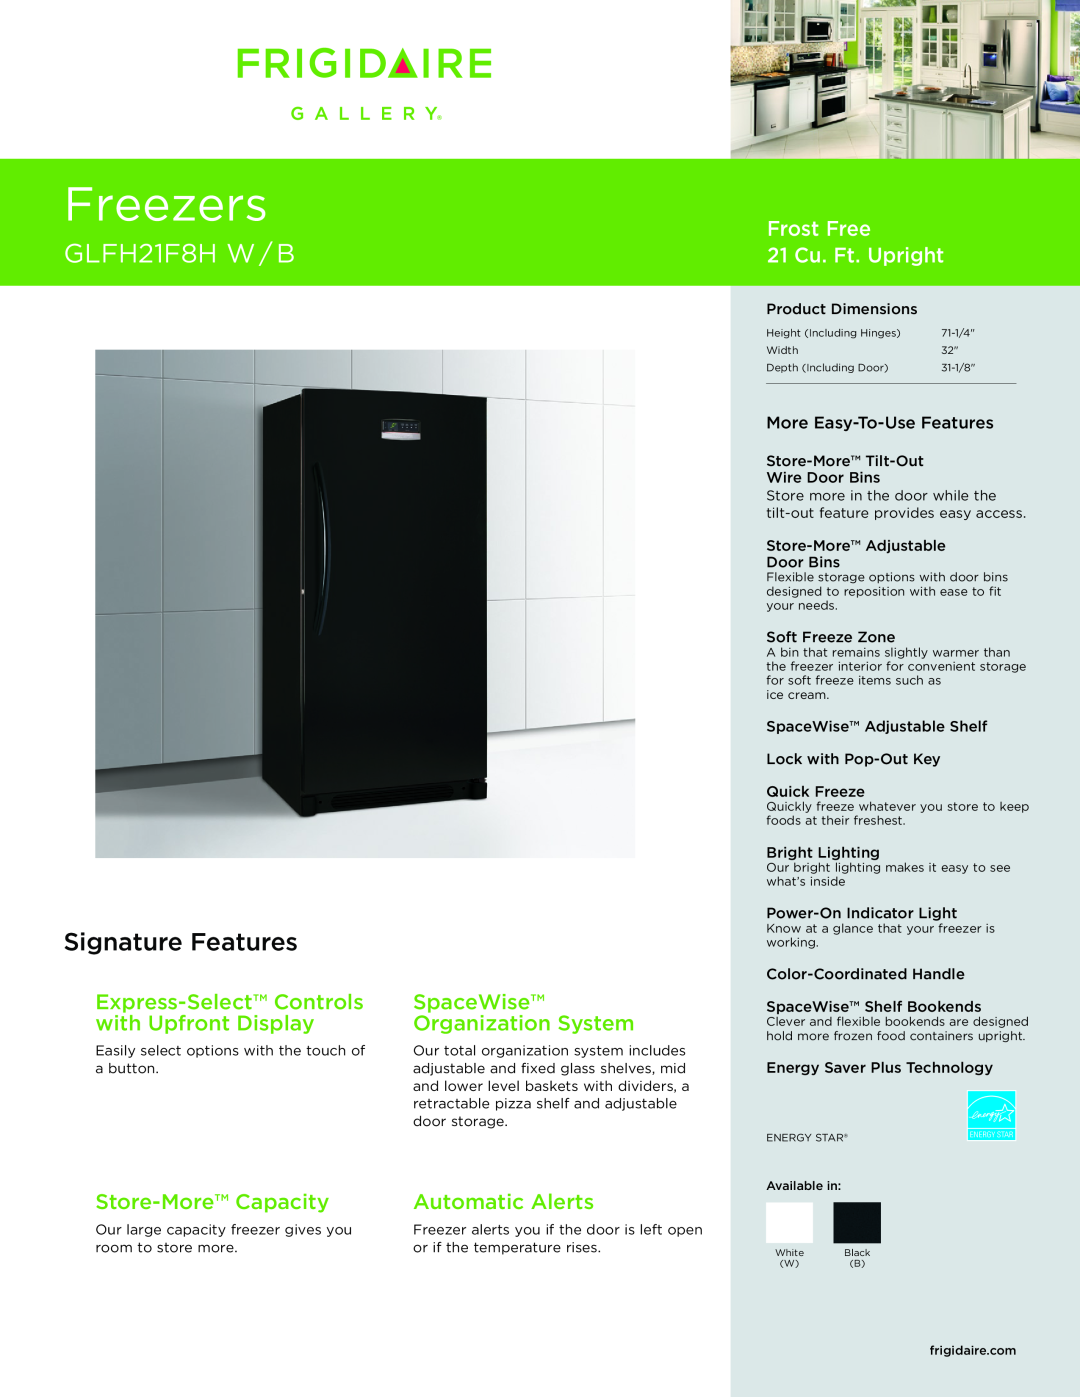 Frigidaire dimensions Freezers, GLFH21F8H W / B, Signature Features, Frost Free 21 Cu. Ft. Upright, Store-MoreCapacity 